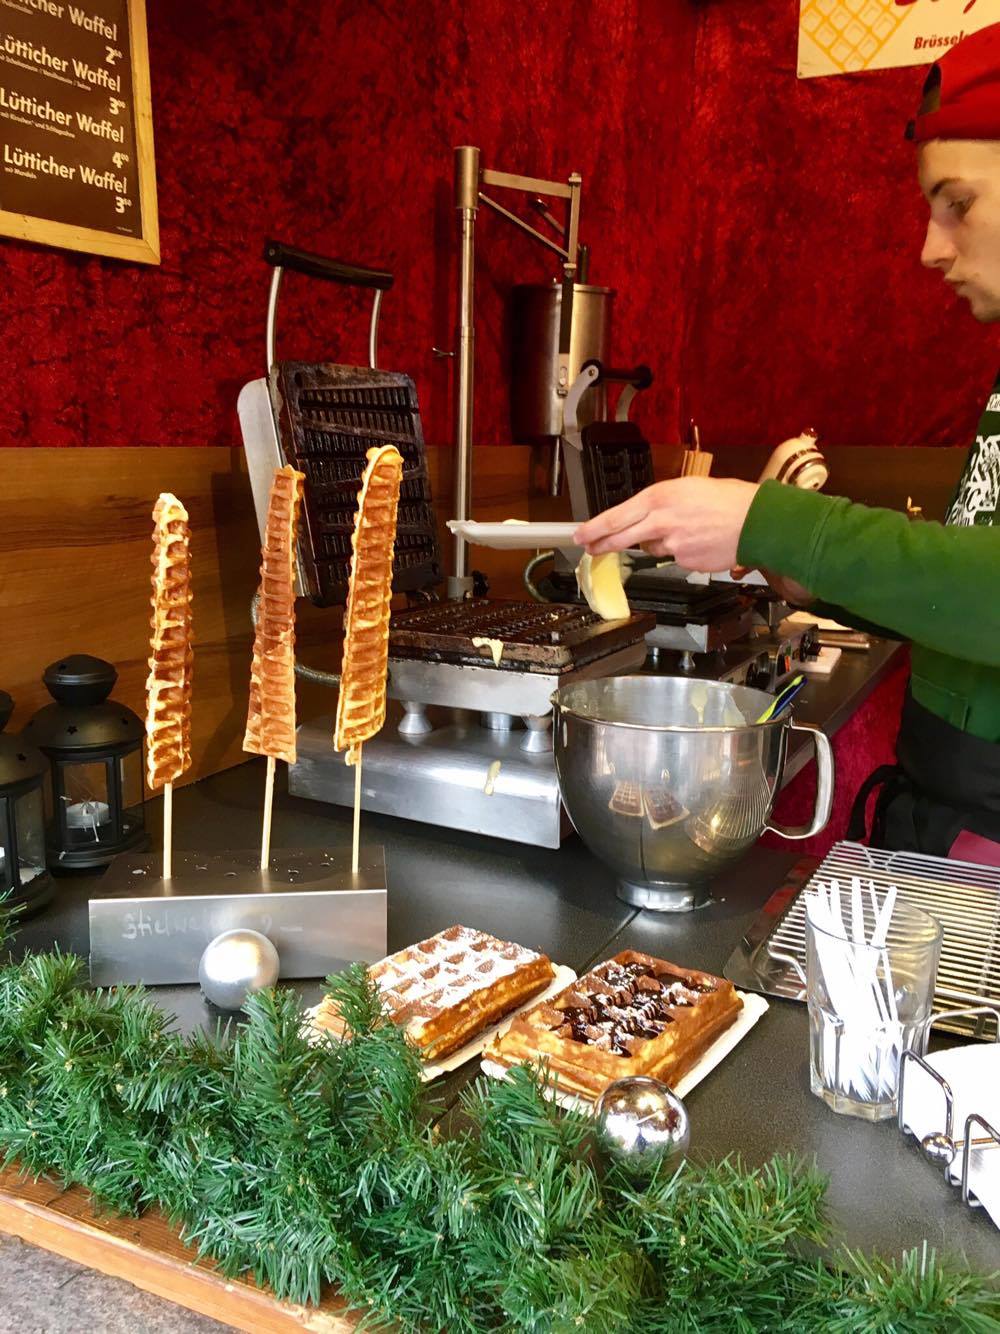 Waffles on a stick? Yes, please.